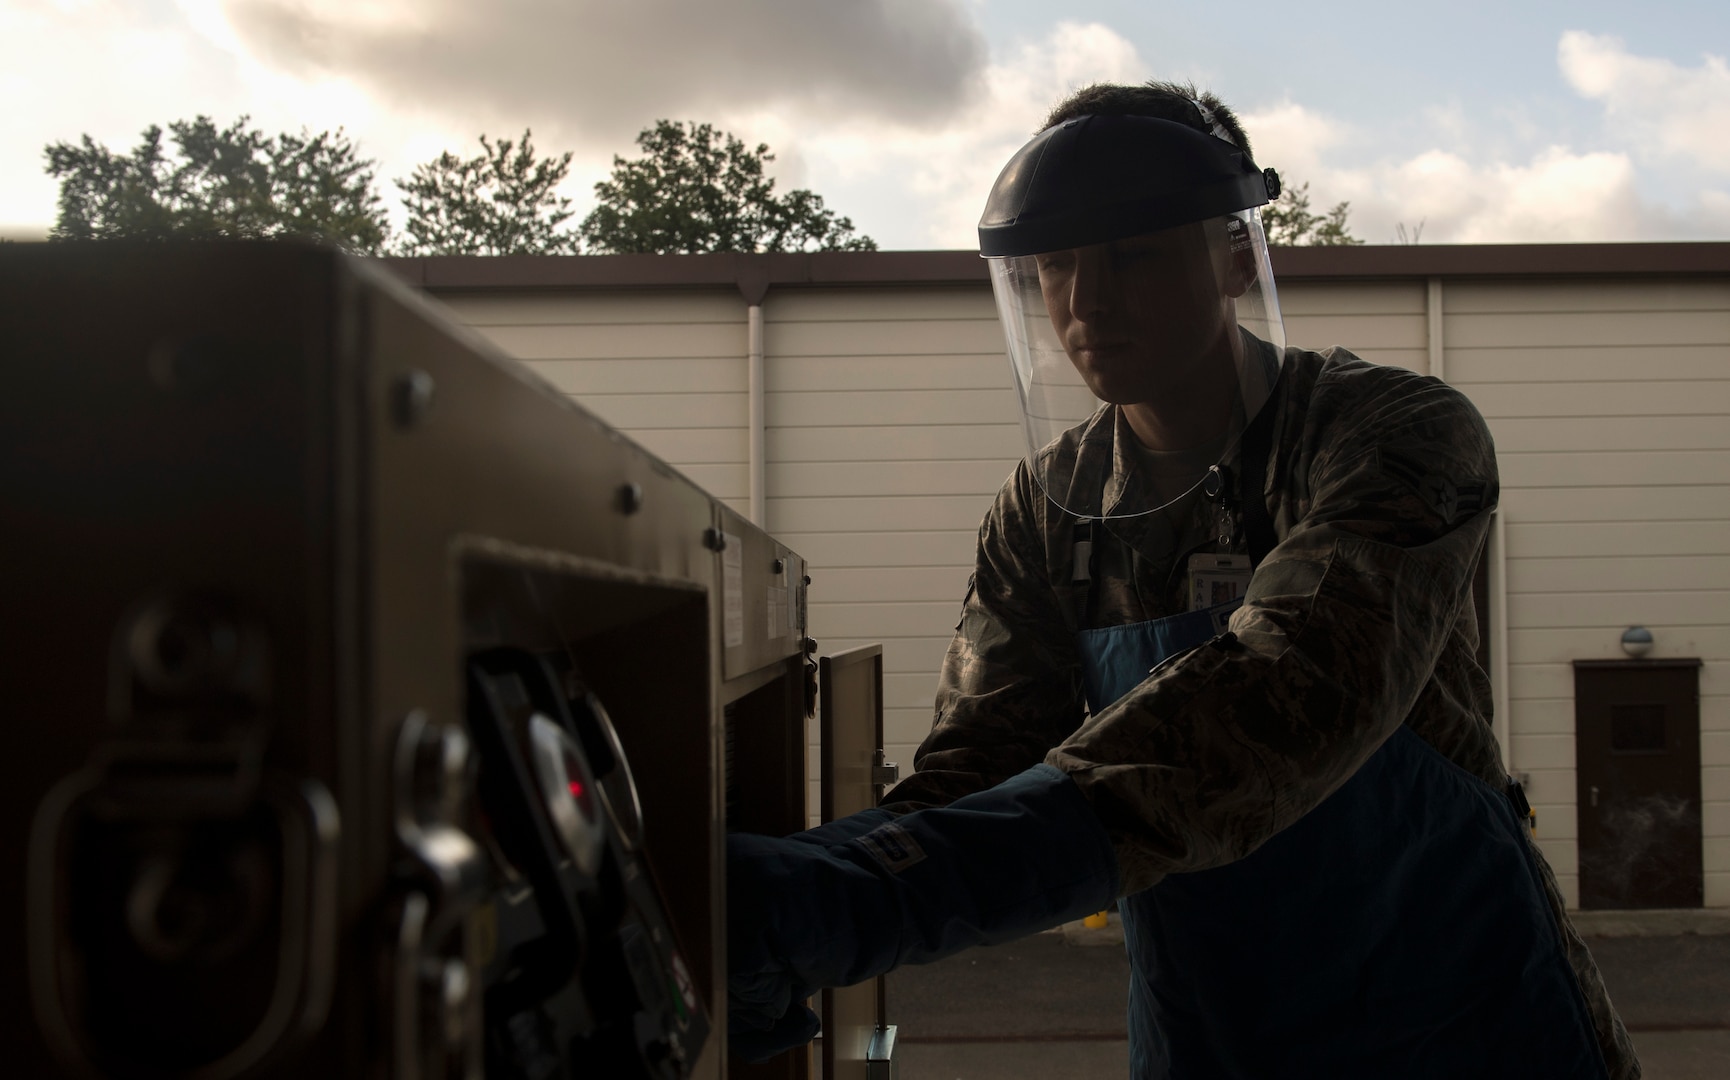 U.S. Air Force Airman 1st Class Ryan Thomas, 86th Medical Support Squadron biomedical equipment technician, adjusts the settings on an oxygen generator and liquefier on Ramstein Air Base, Germany, Sept. 7, 2017. The OGL is used to fill medical equipment with liquid oxygen and was recently purchased by the 86th MDSS, along with a nitrogen generator, to cut their turnaround time for filling the equipment from three weeks to two or three days and to save the Air Force approximately $7,000 a month. (U.S. Air Force photo by Senior Airman Tryphena Mayhugh)